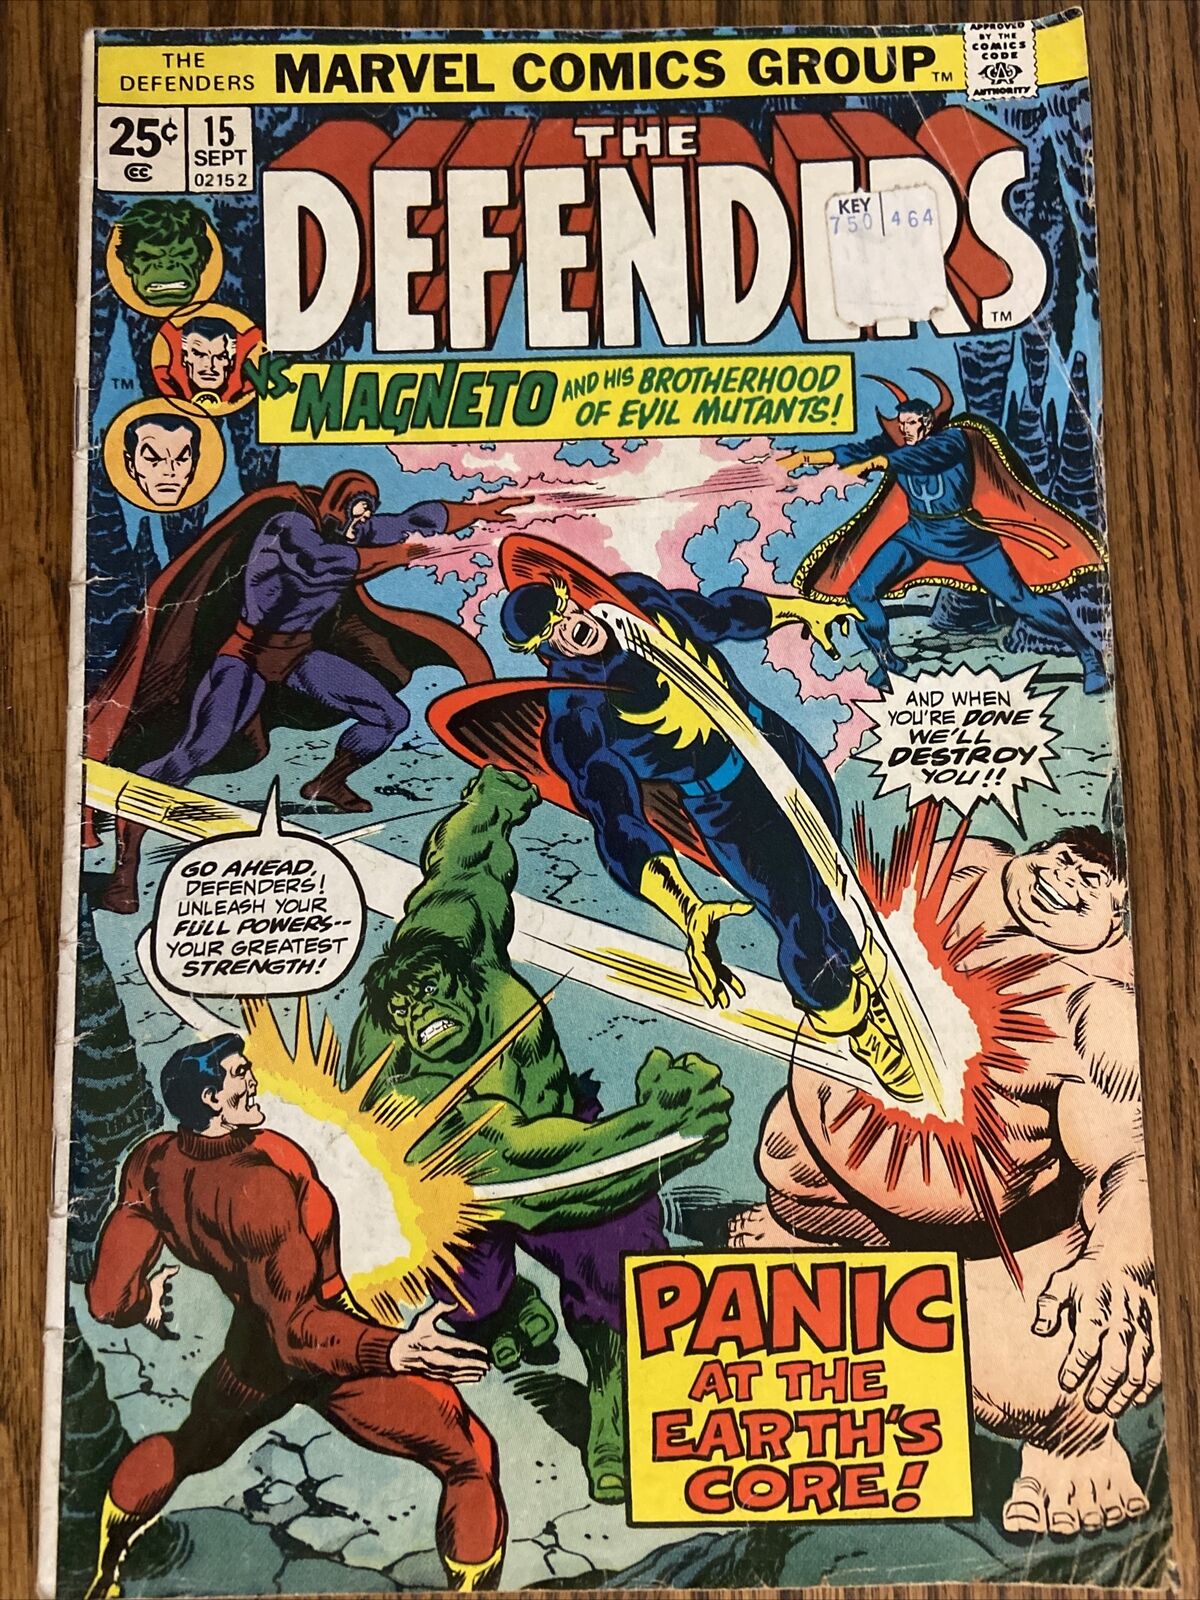 Sept 1974 Issue THE DEFENDERS #15 MAGNETO COVER BRONZE AGE MARVEL COMICS